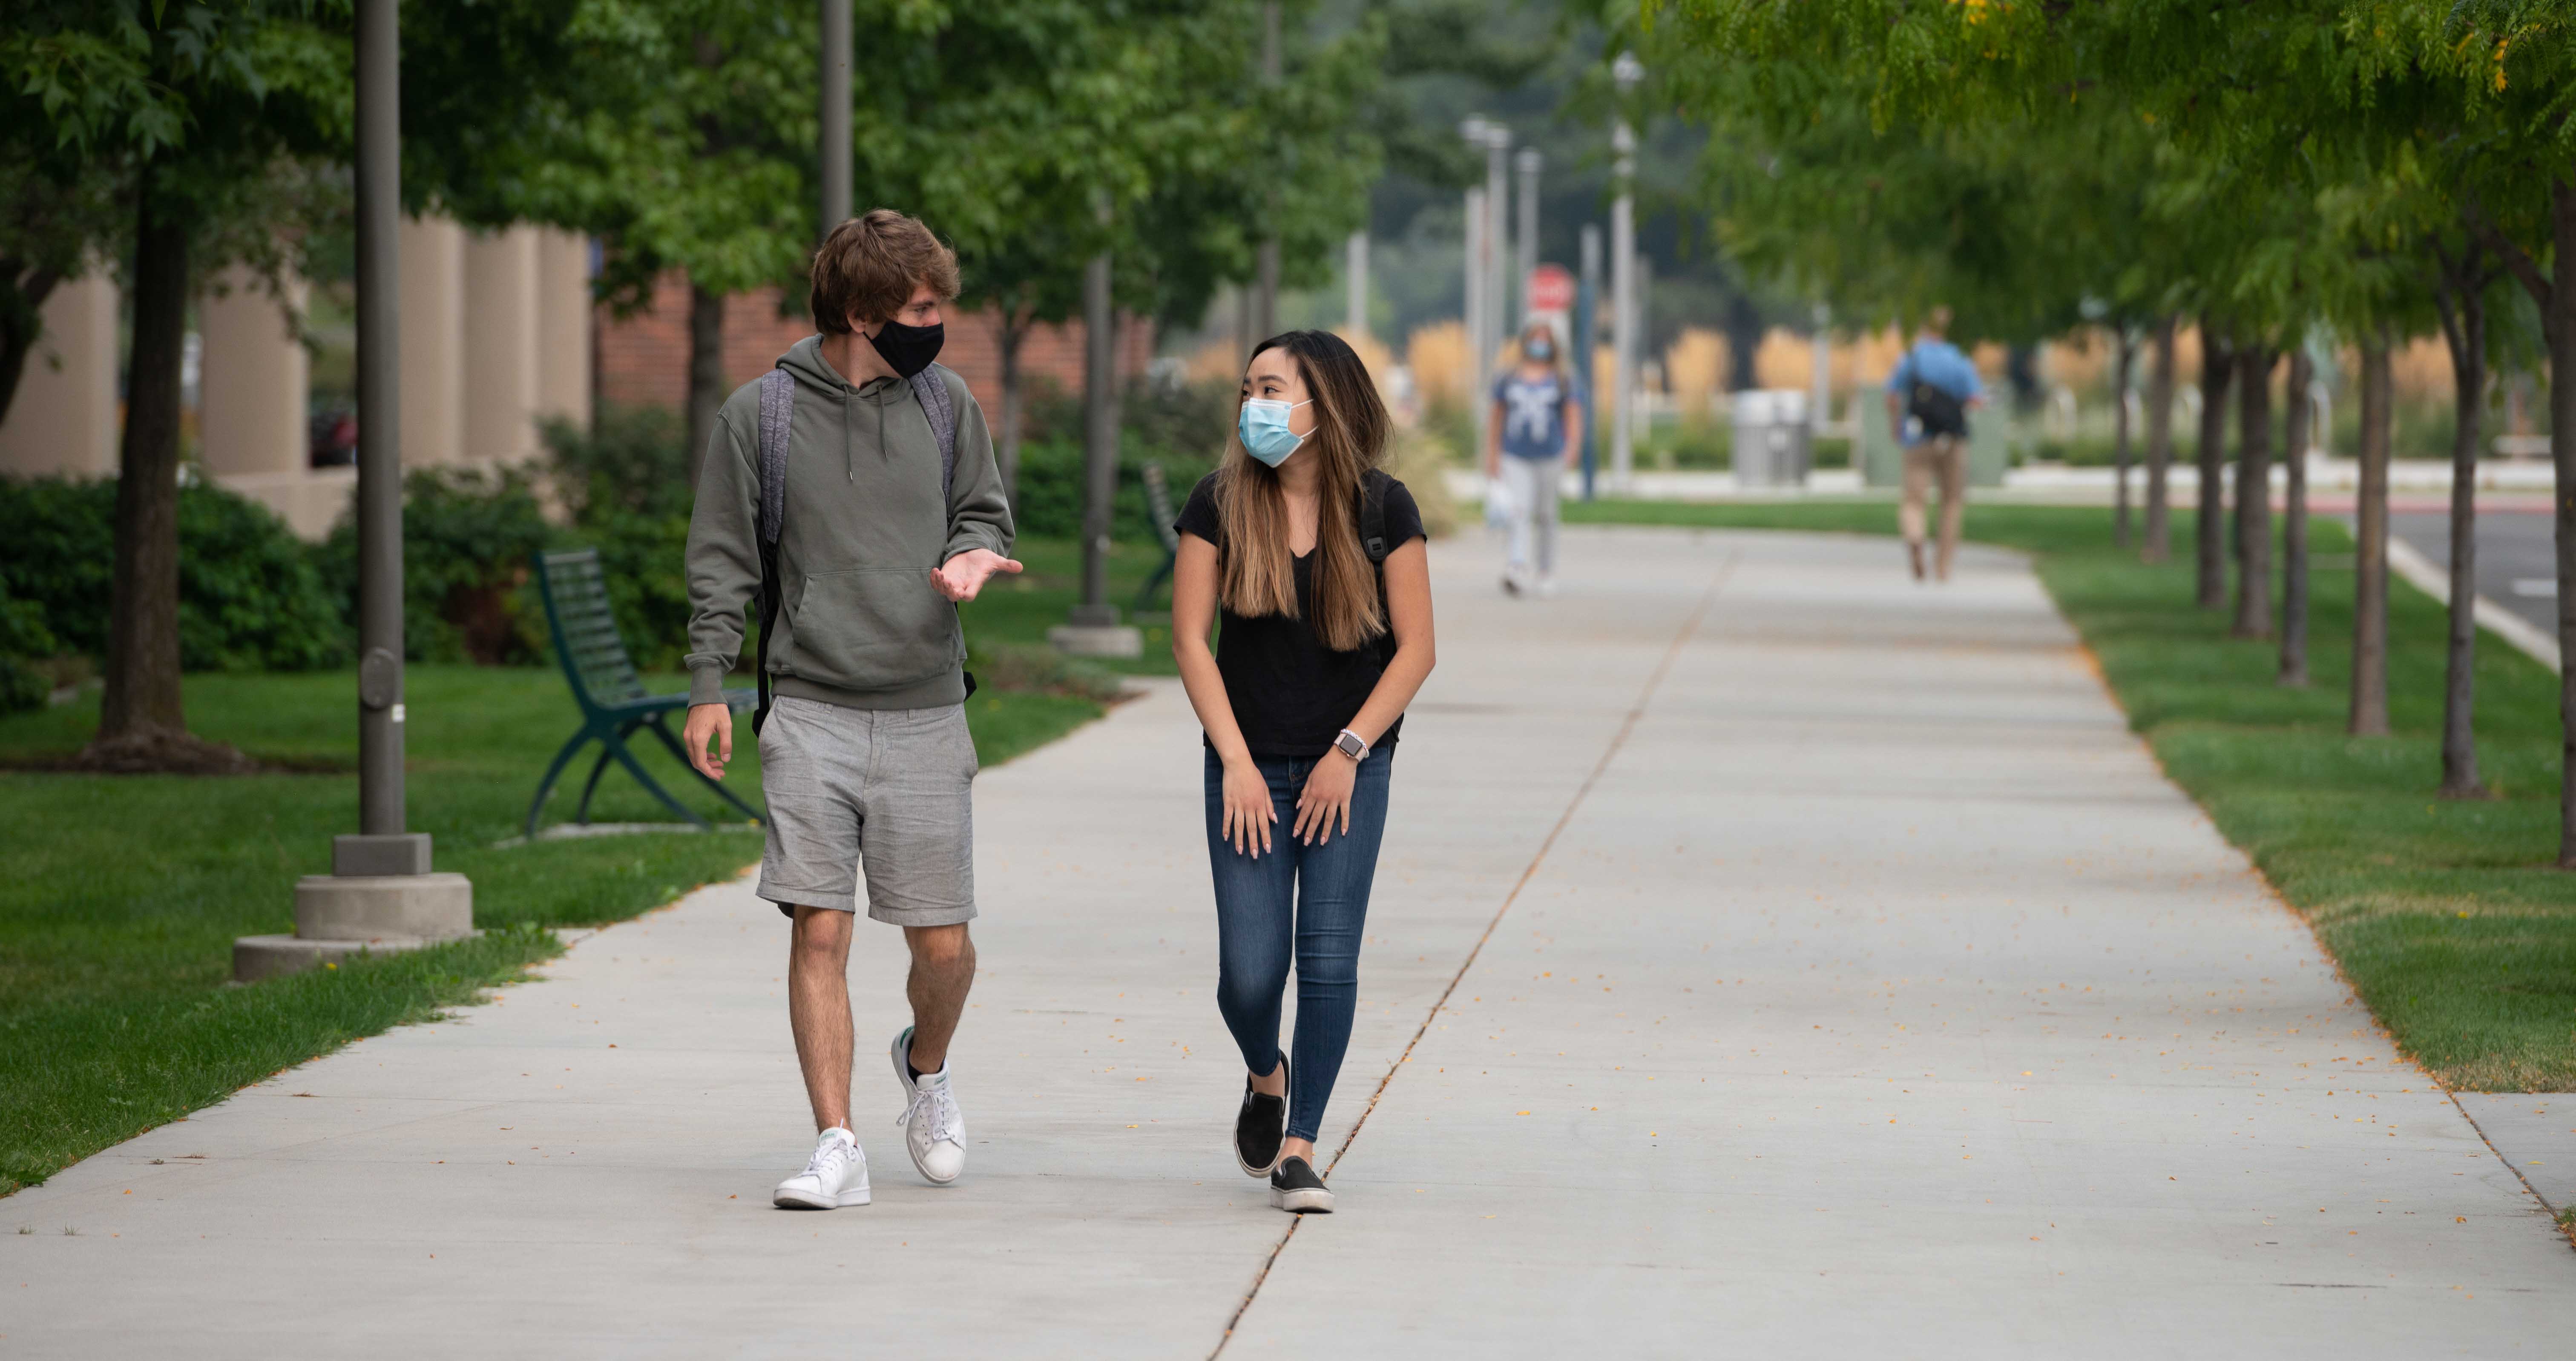 Students walking in quad